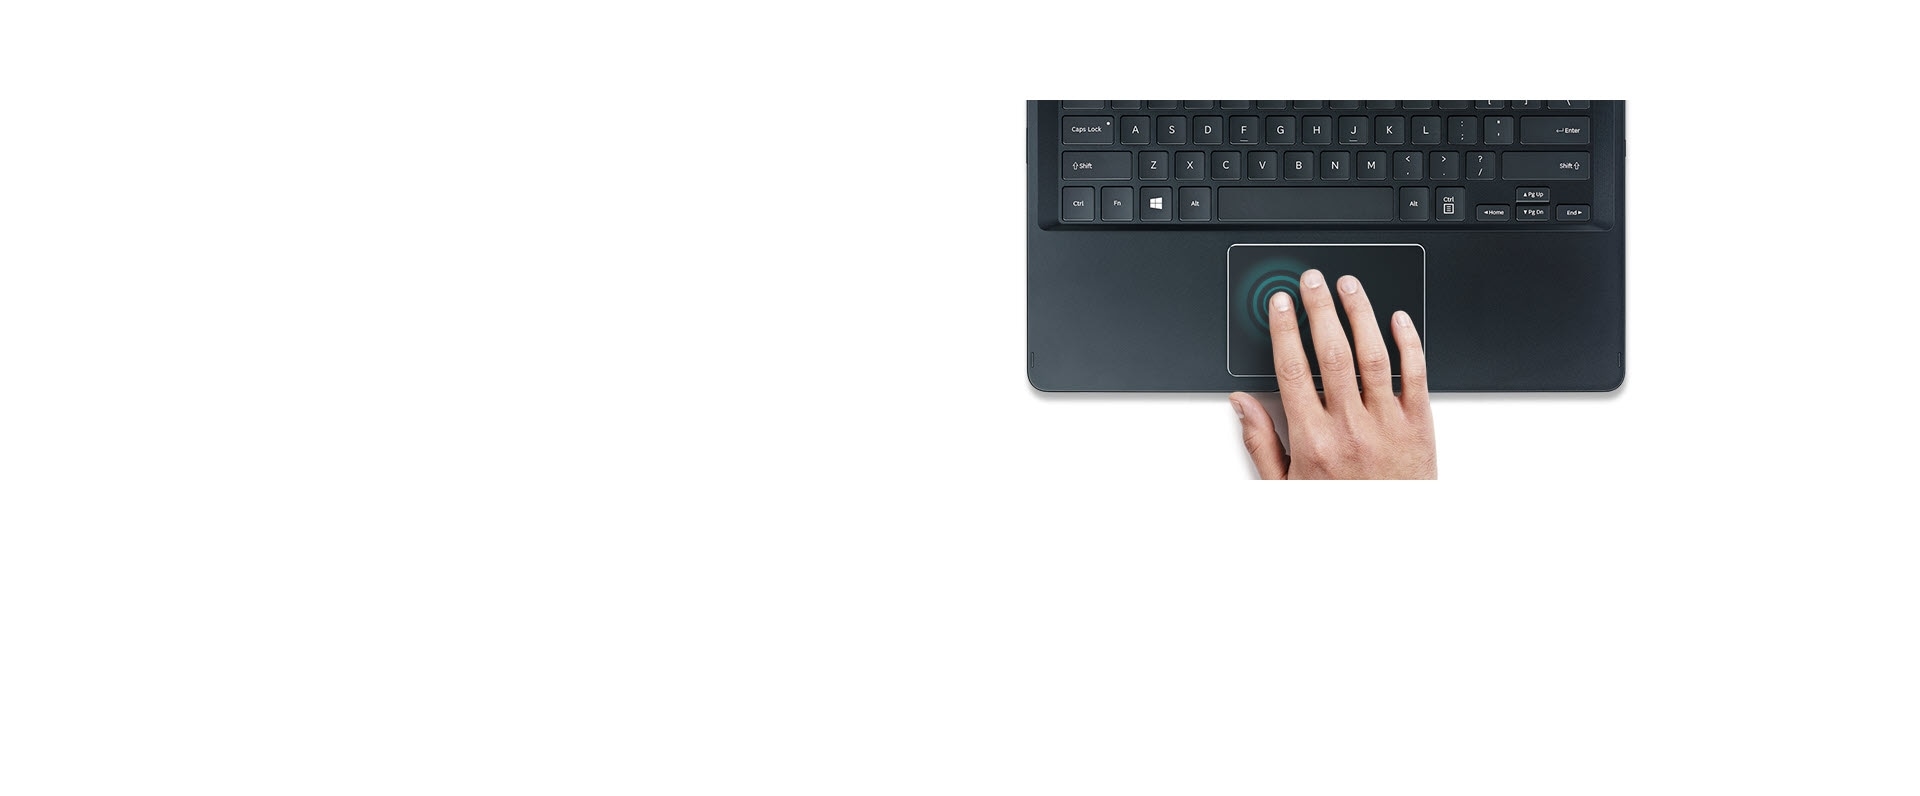 An image showing a user operating the Notebook 9 spin's touchpad.